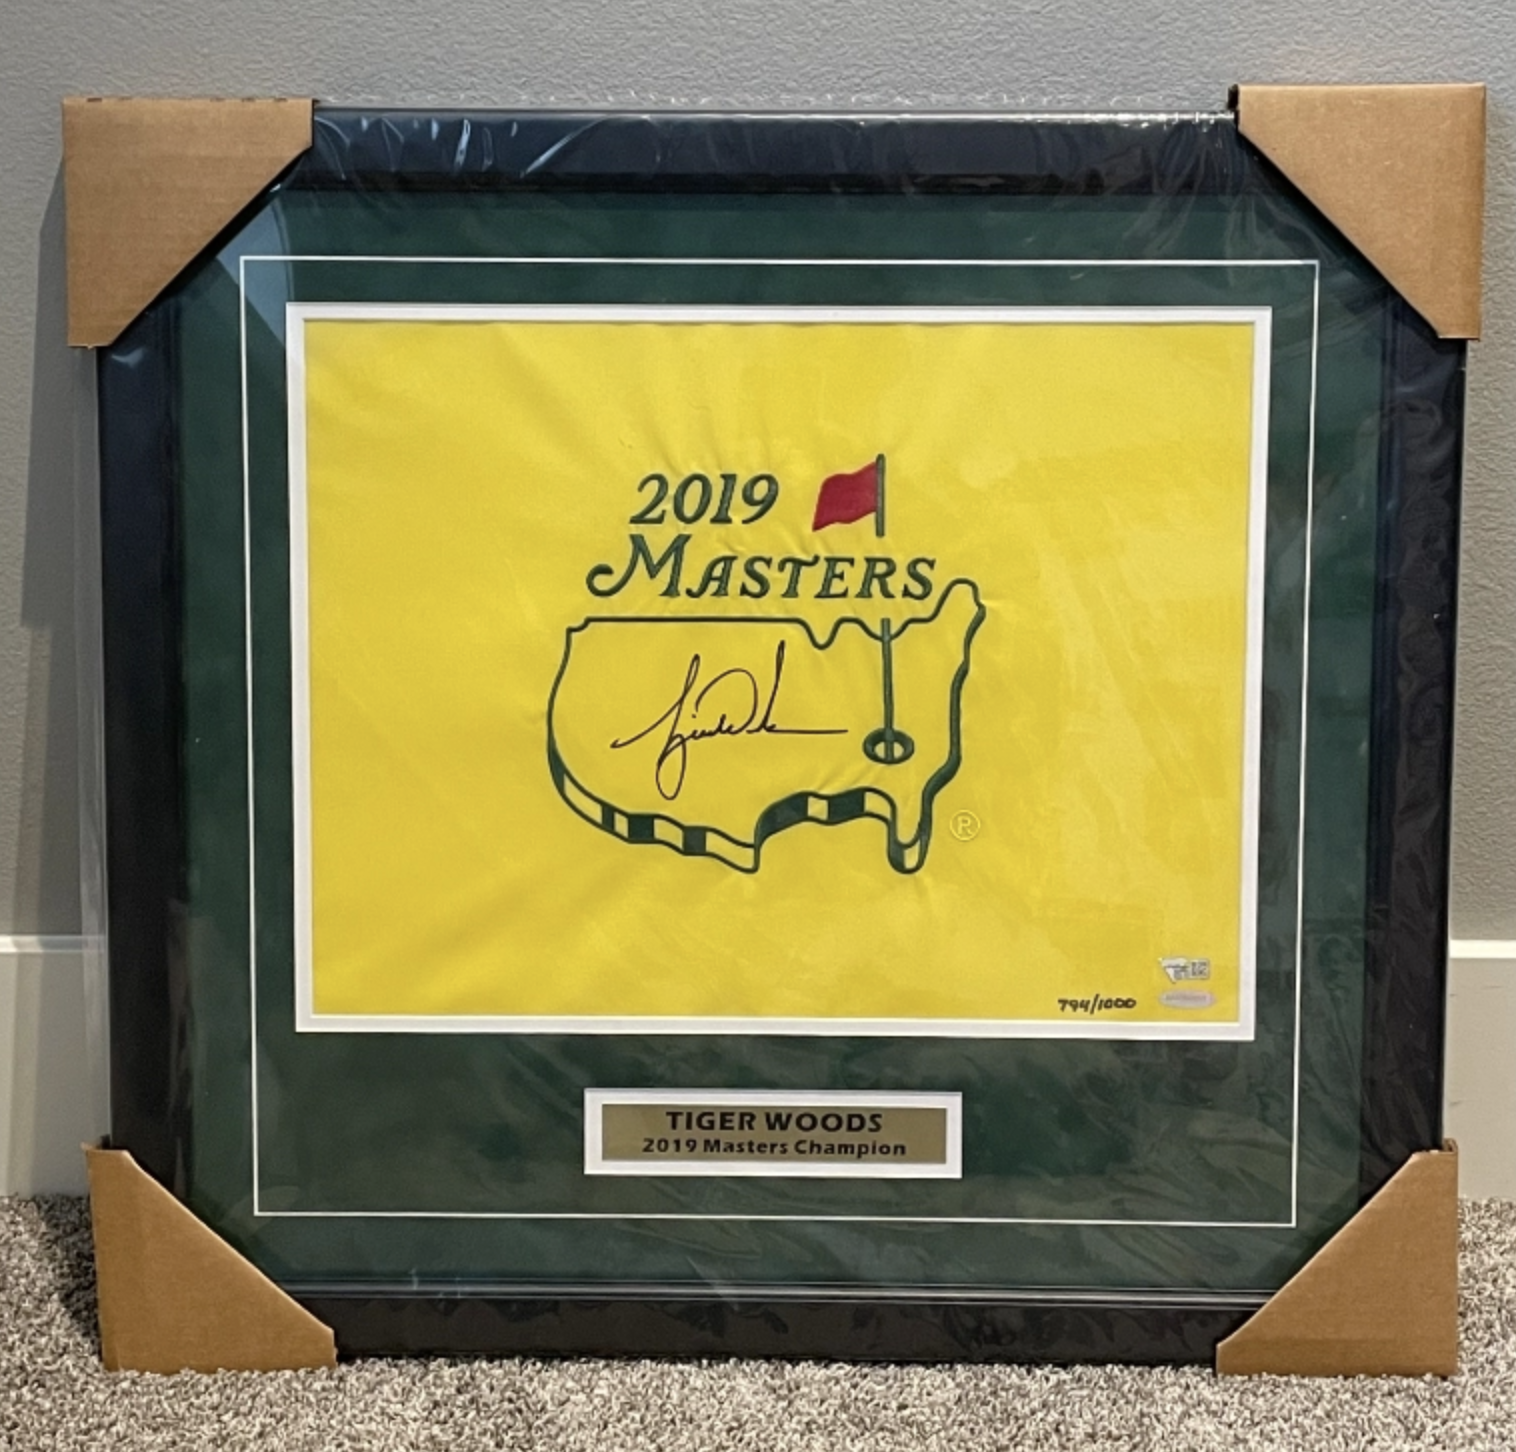 Now you can buy a Tiger Woods signed 2019 Masters flag! – GolfWRX